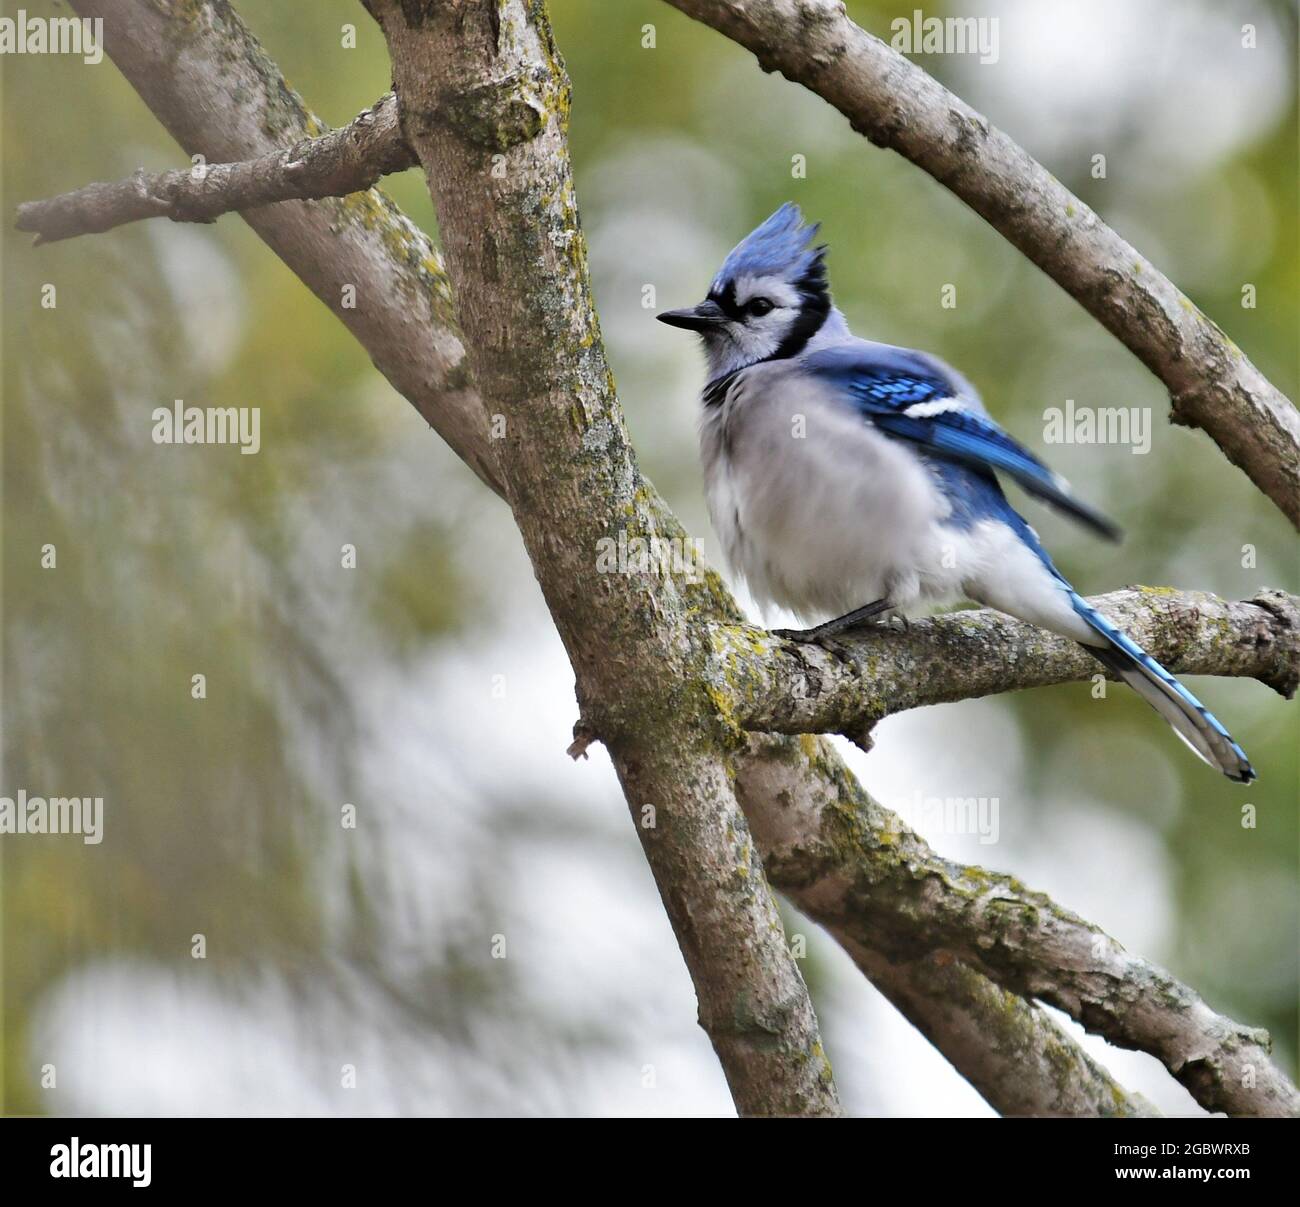 Blue Jay Perched in Red Maple Fall Leaves Stock Photo - Alamy